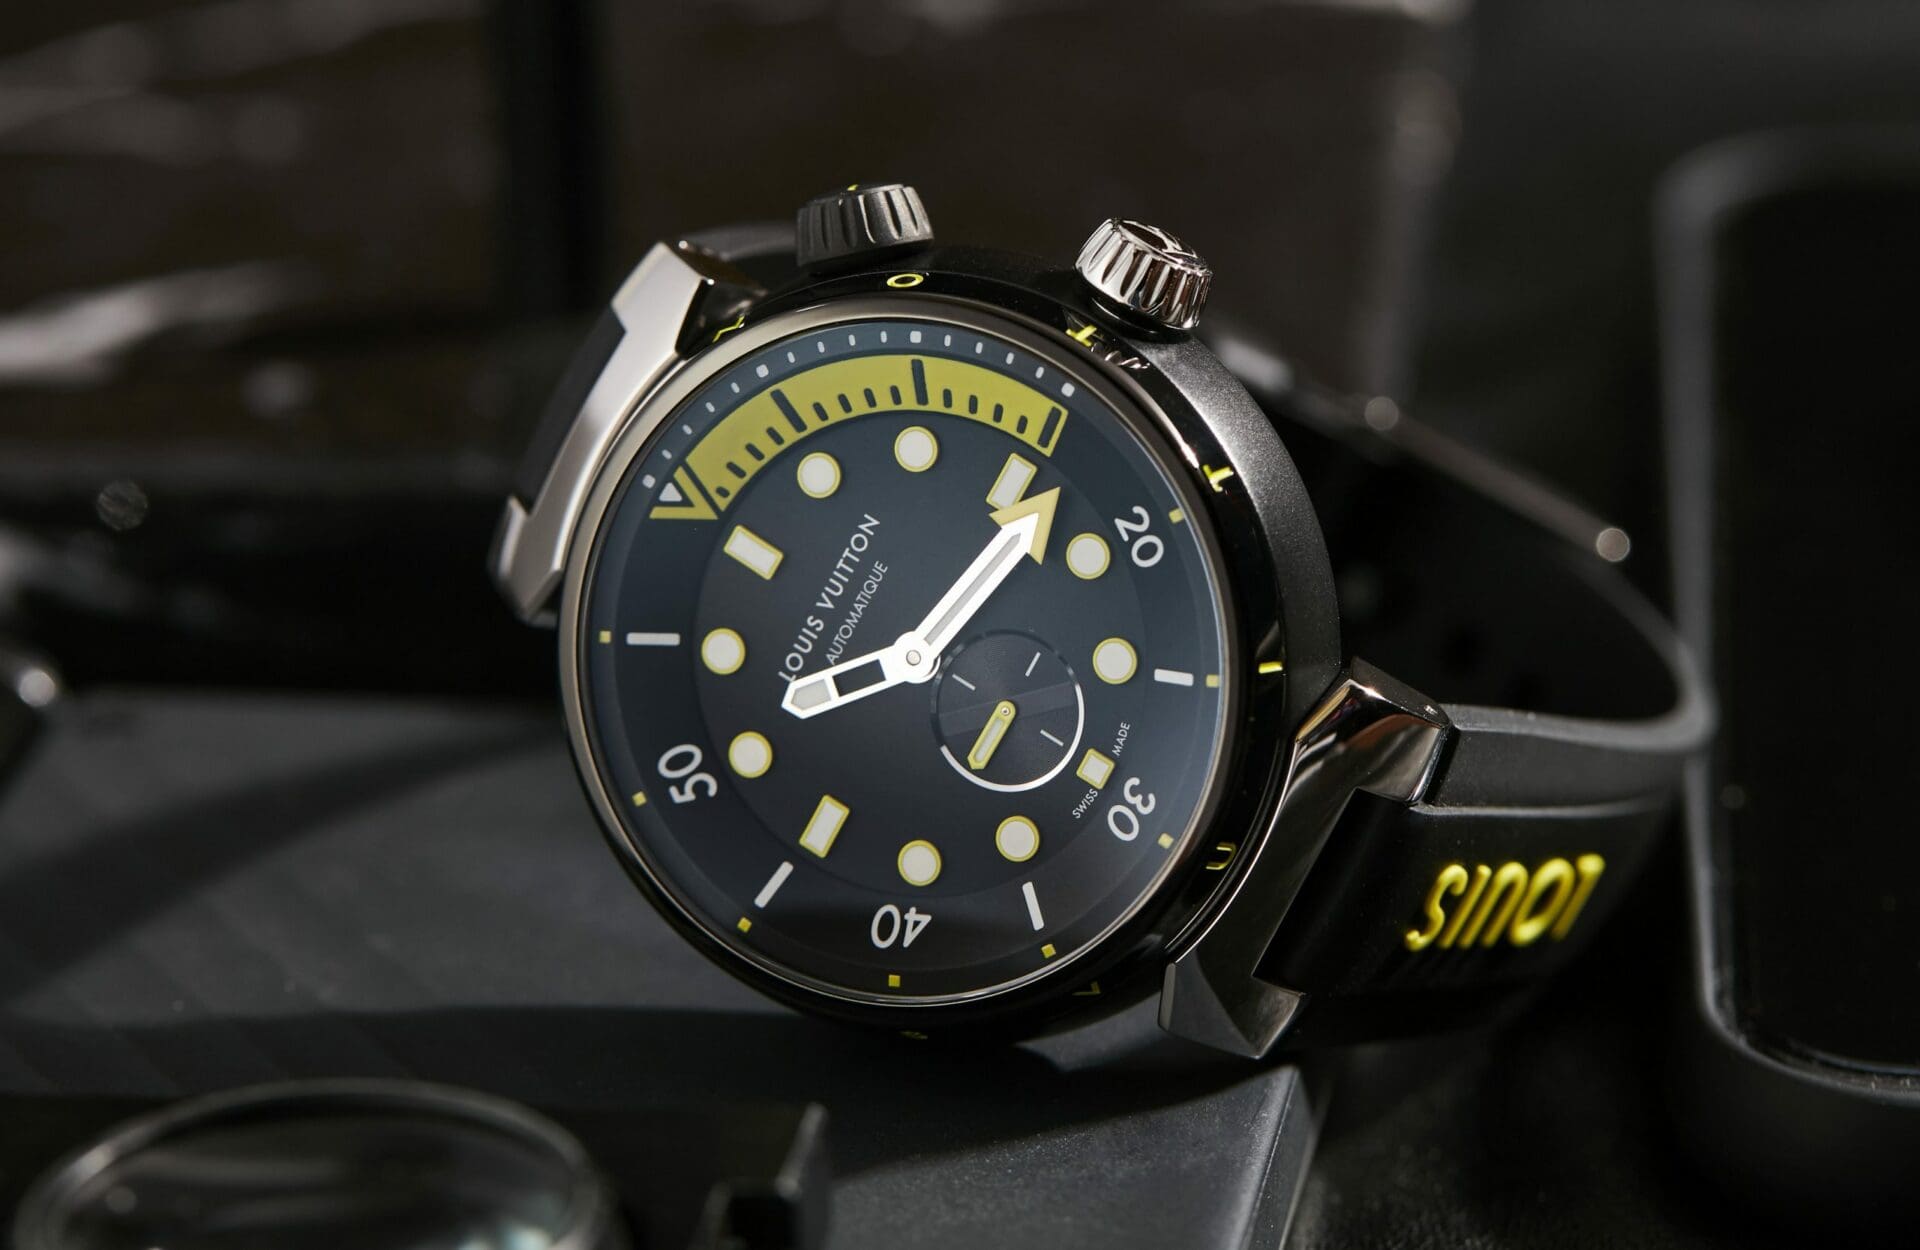 VIDEO: The Louis Vuitton Tambour Street Diver is a fashion-forward diving watch that oozes urban cool